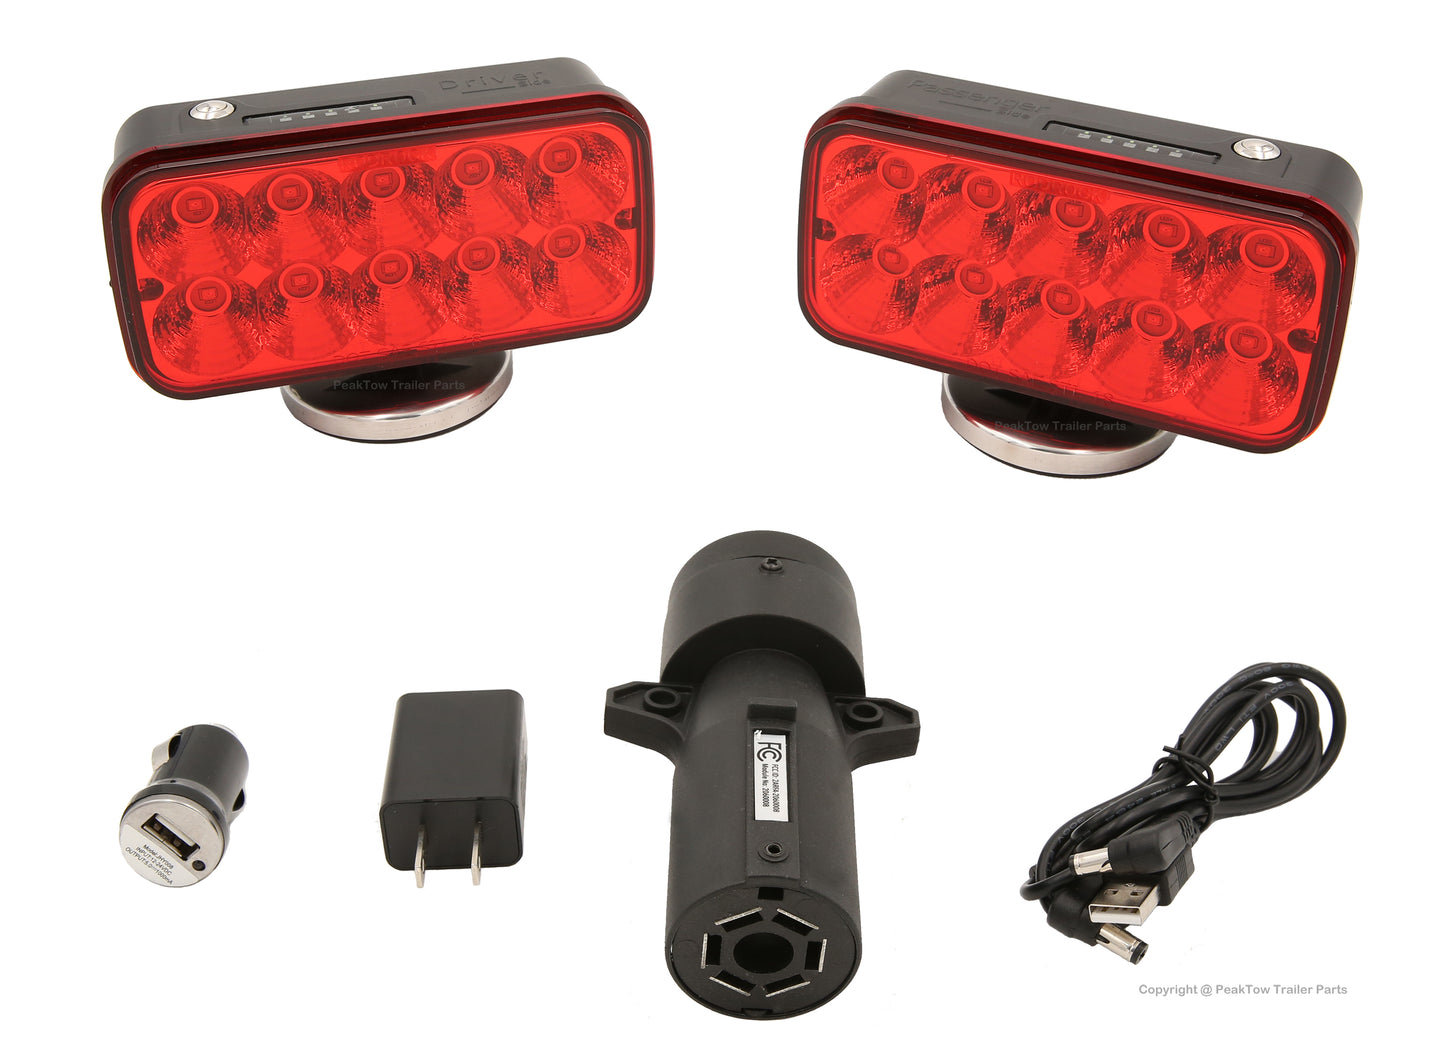 PTL0104 LED Wireless Tow Light With Rechargeable Battery, Strong Magnetic Base, and Military Case